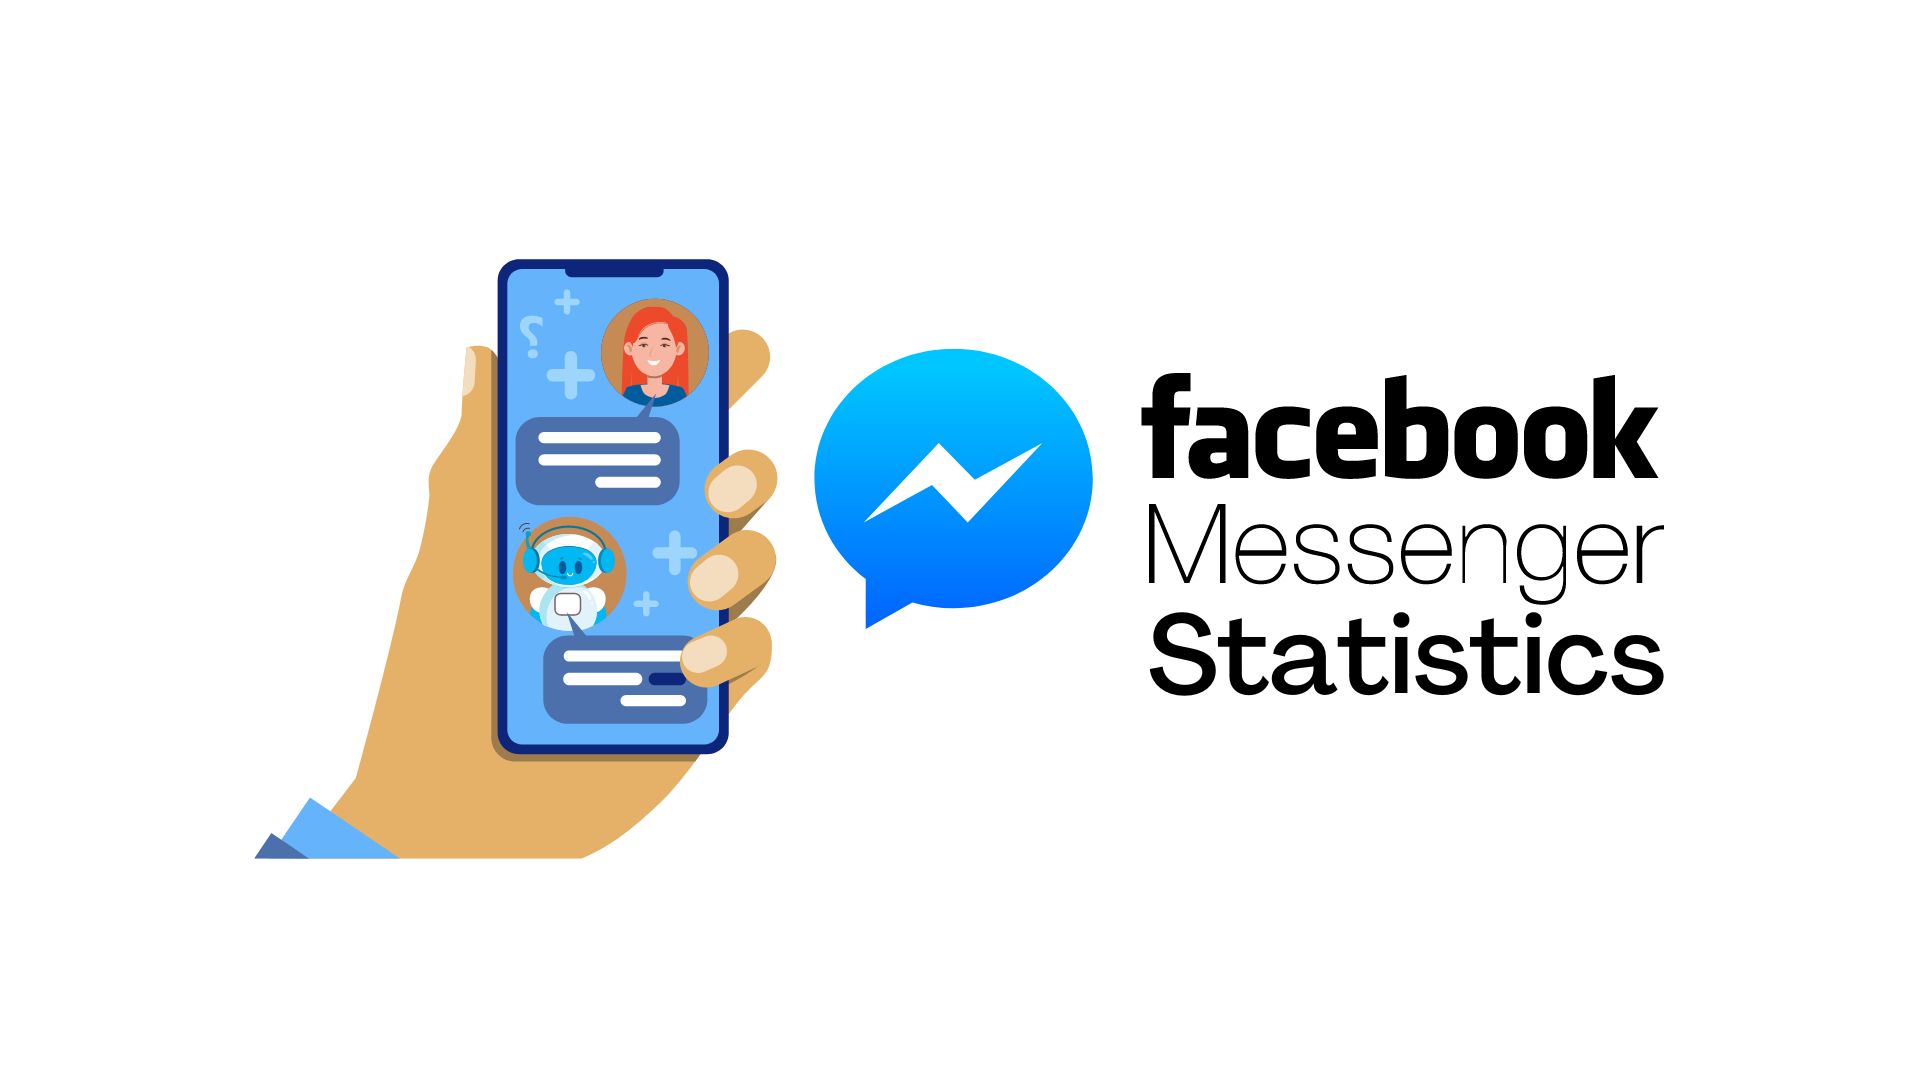 Facebook Messenger Statistics 2022 - Trends, Facts and Users